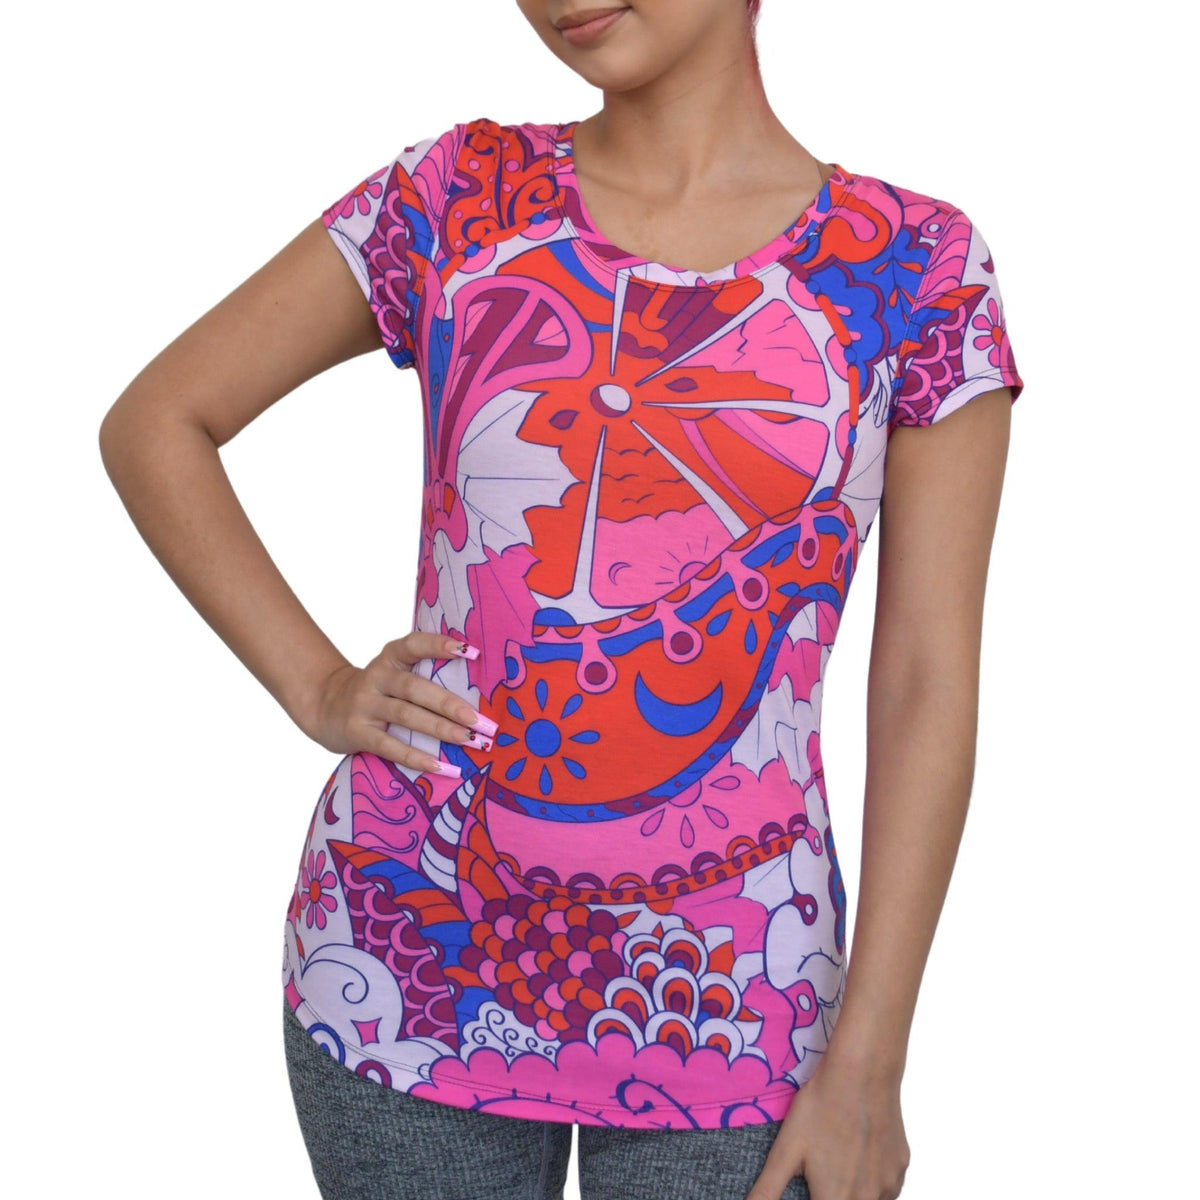 Sameria Fitted Tee - Pink Kaleidoscope Abstract Floral